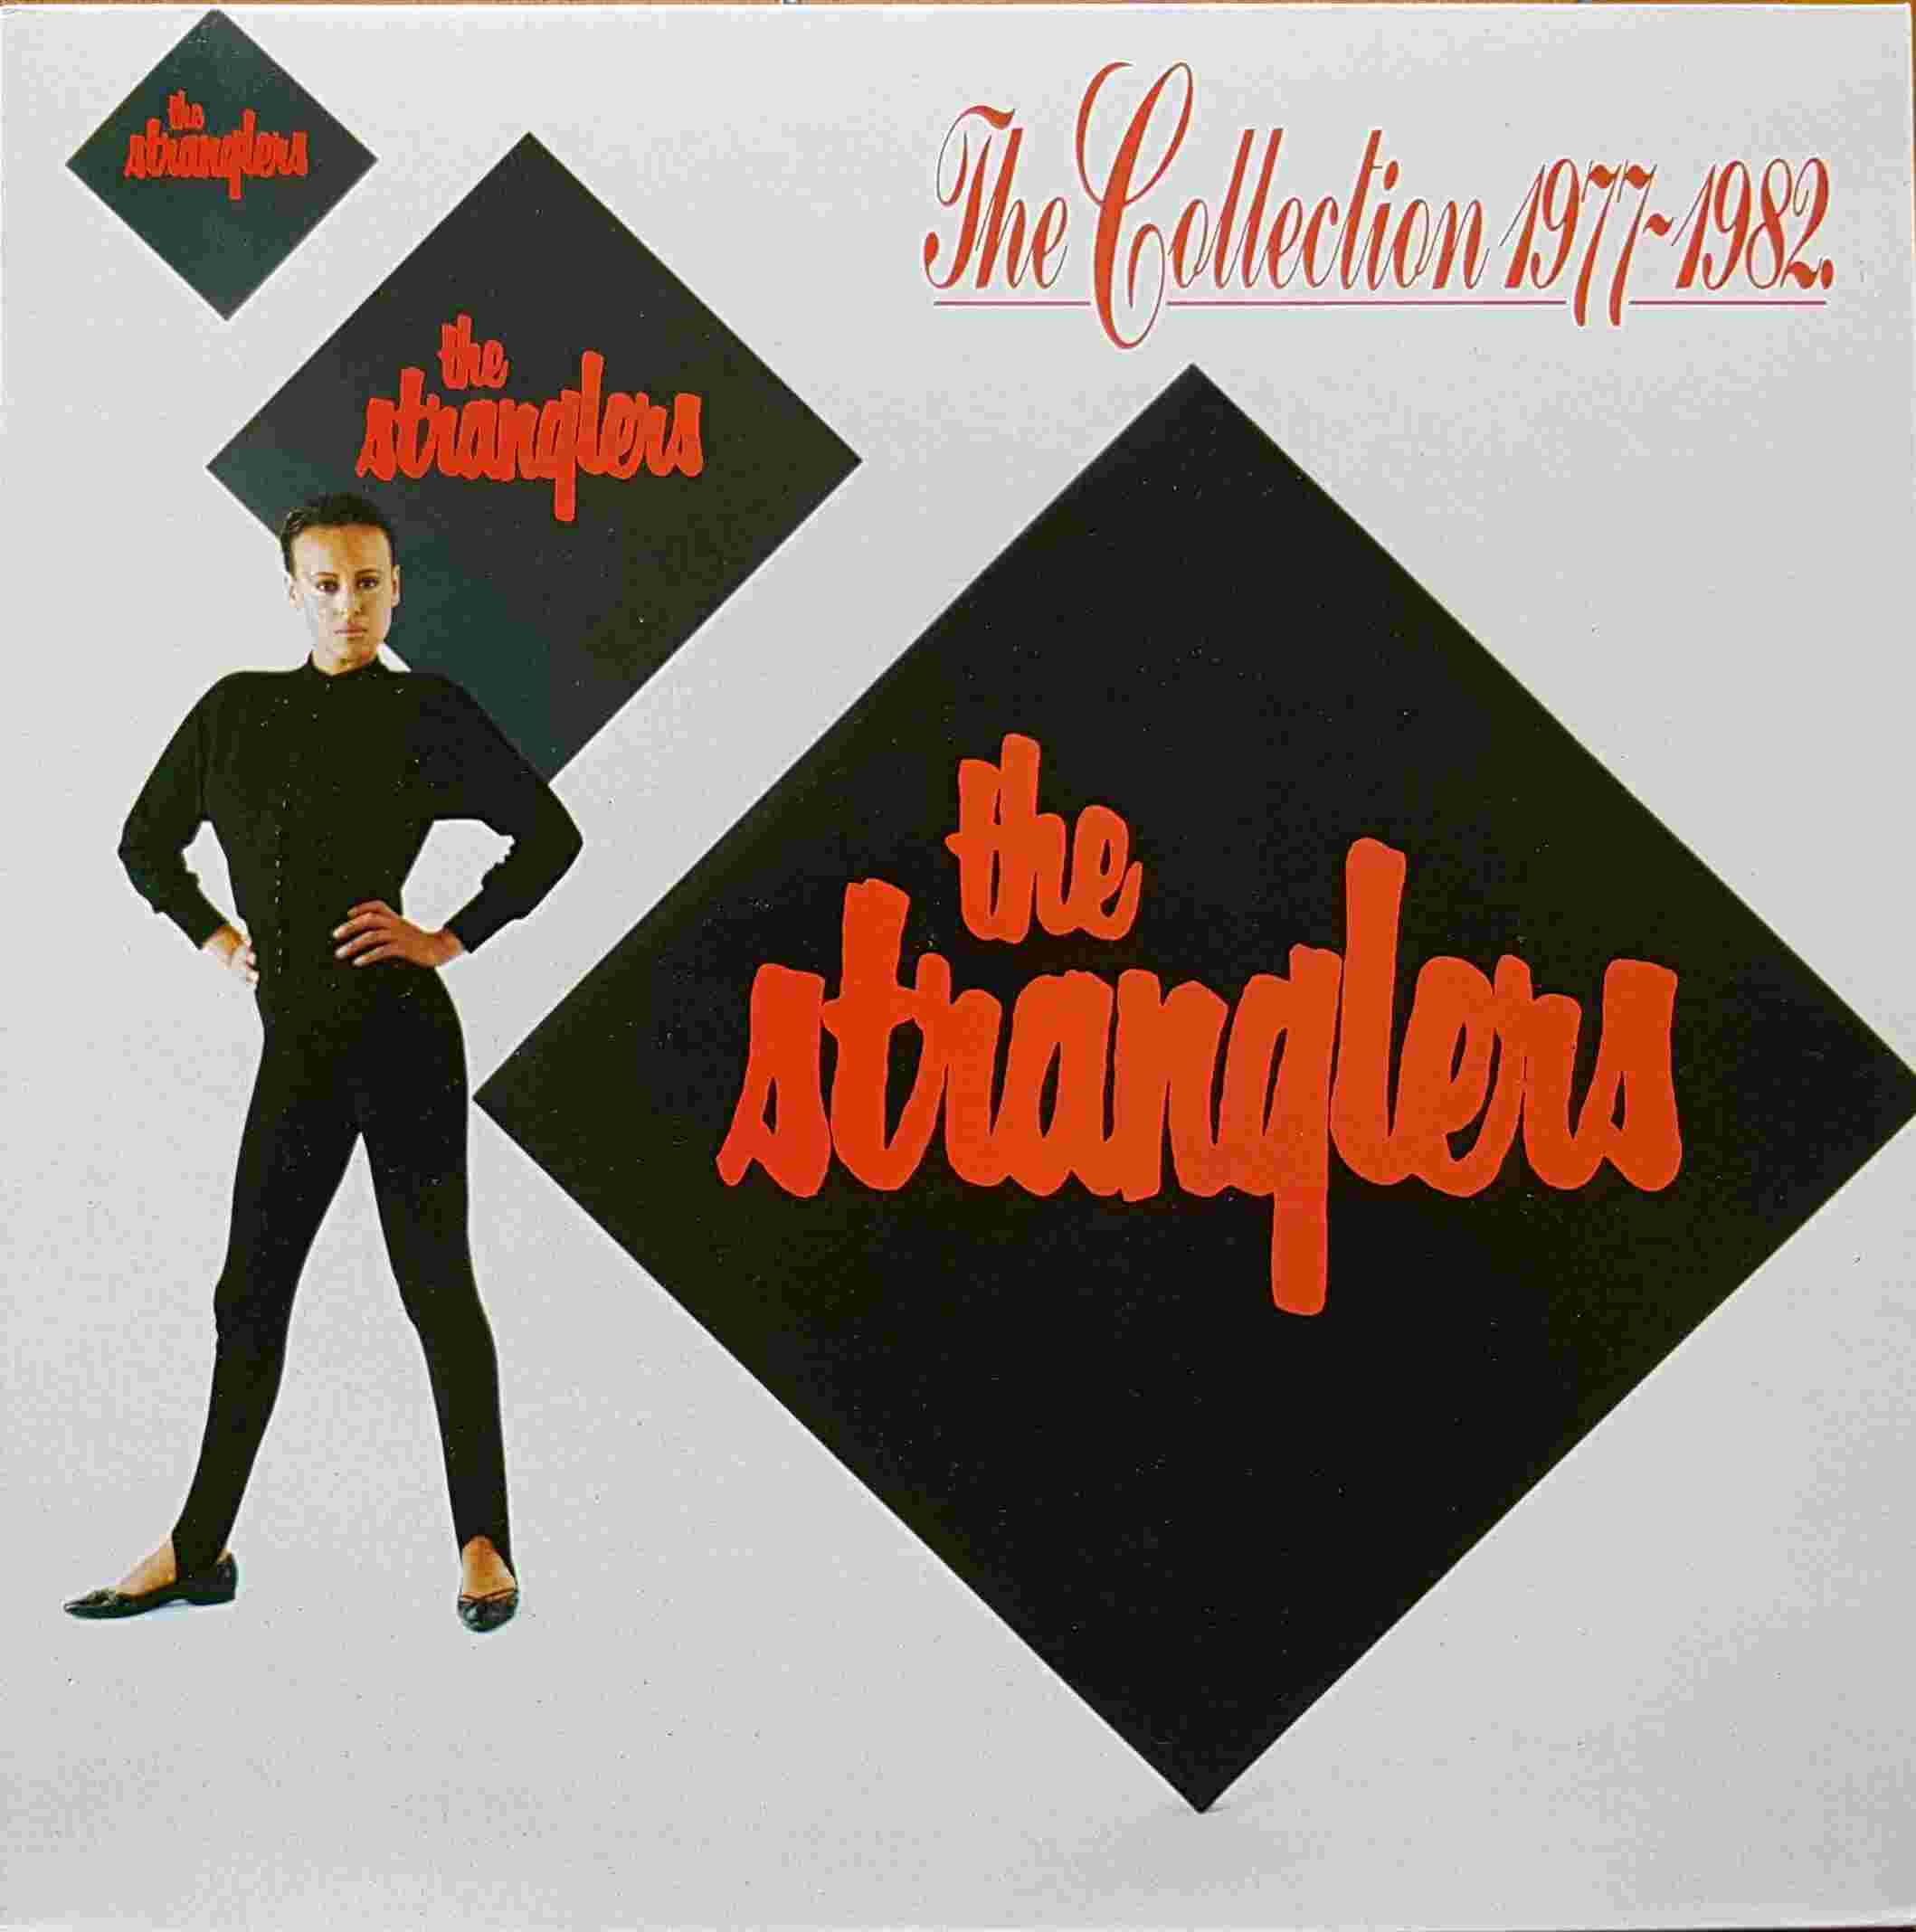 Picture of FA 3230 The collection 1977 - 1982 by artist The Stranglers